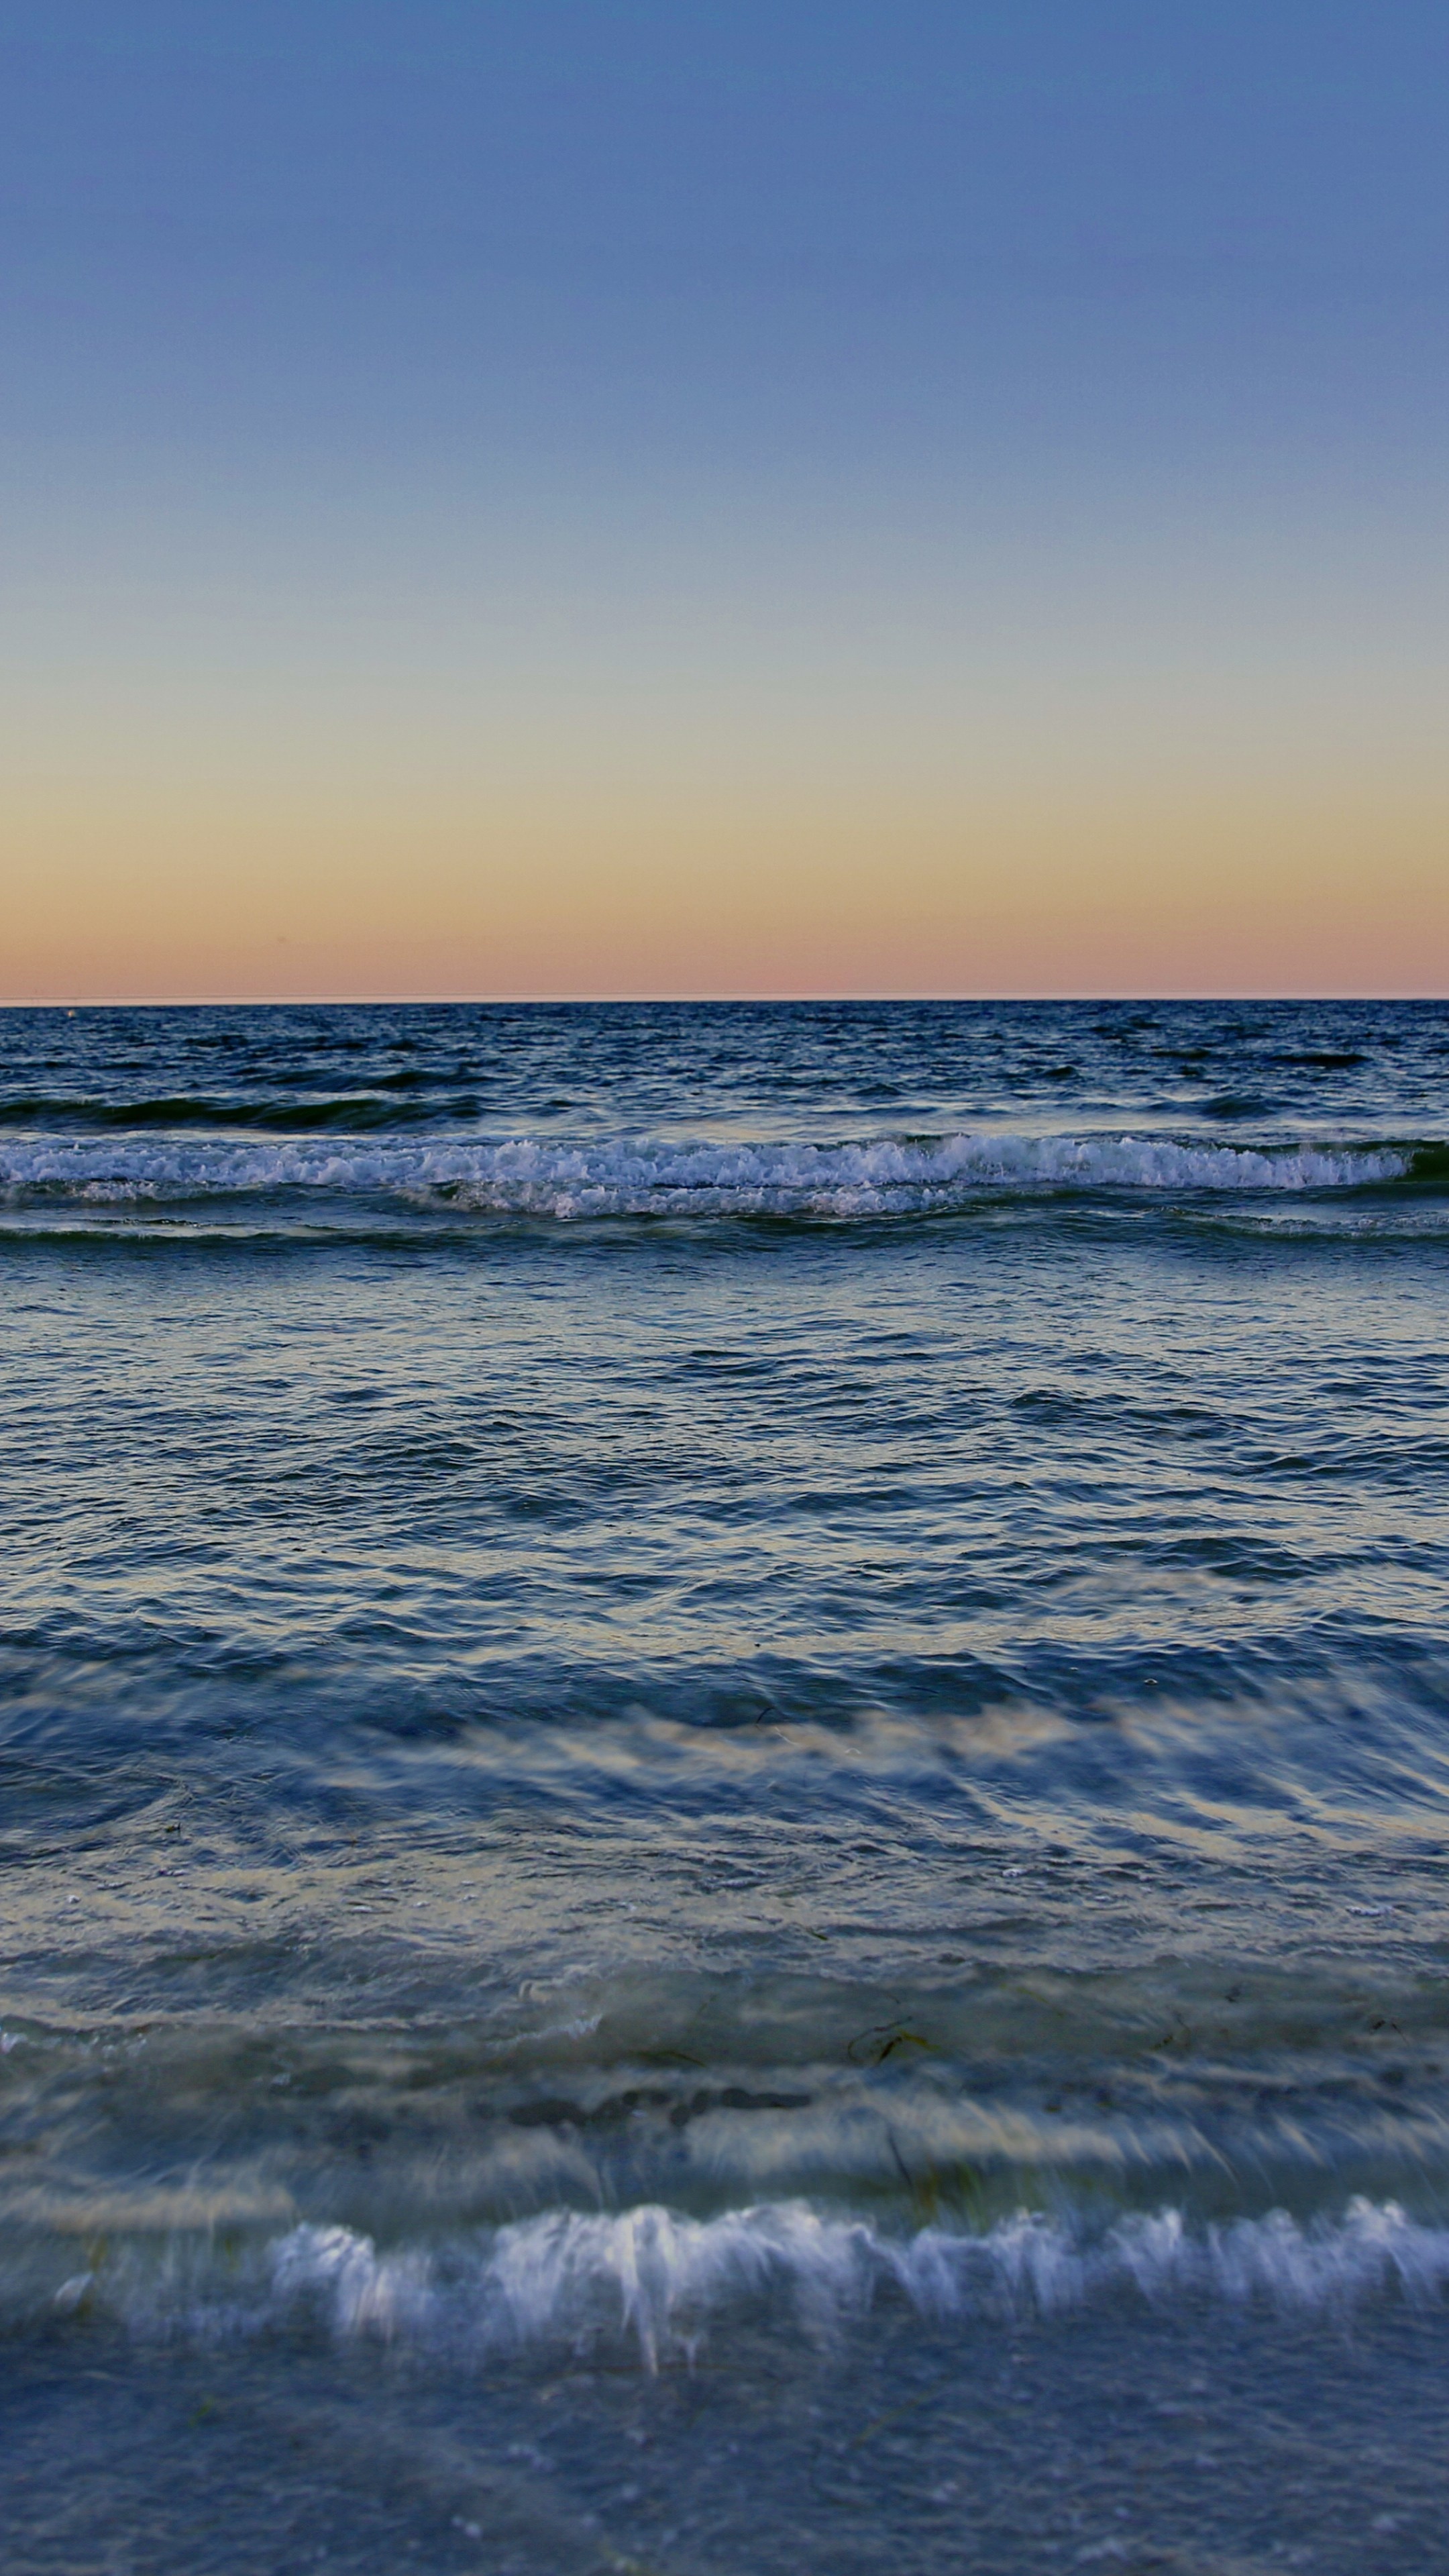 Baltic Sea waves, 4K sunset wallpaper, Ostsee beauty, Water's tranquility, 2160x3840 4K Handy